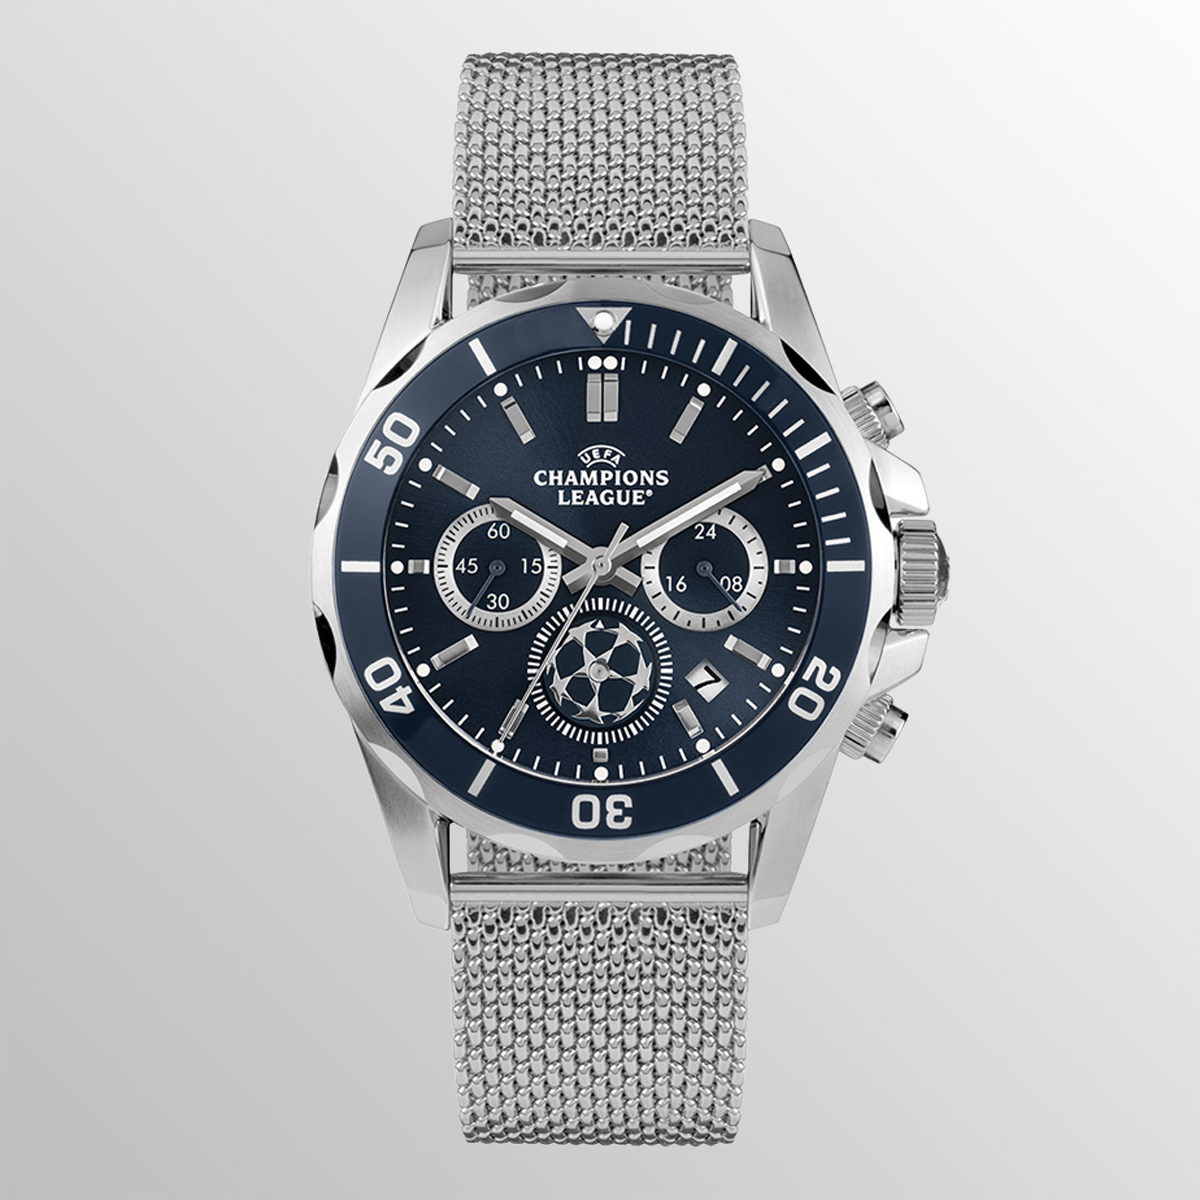 UCL Chronograph CL-103B Jacques Lemans Watch UEFA Club Competitions Online Store